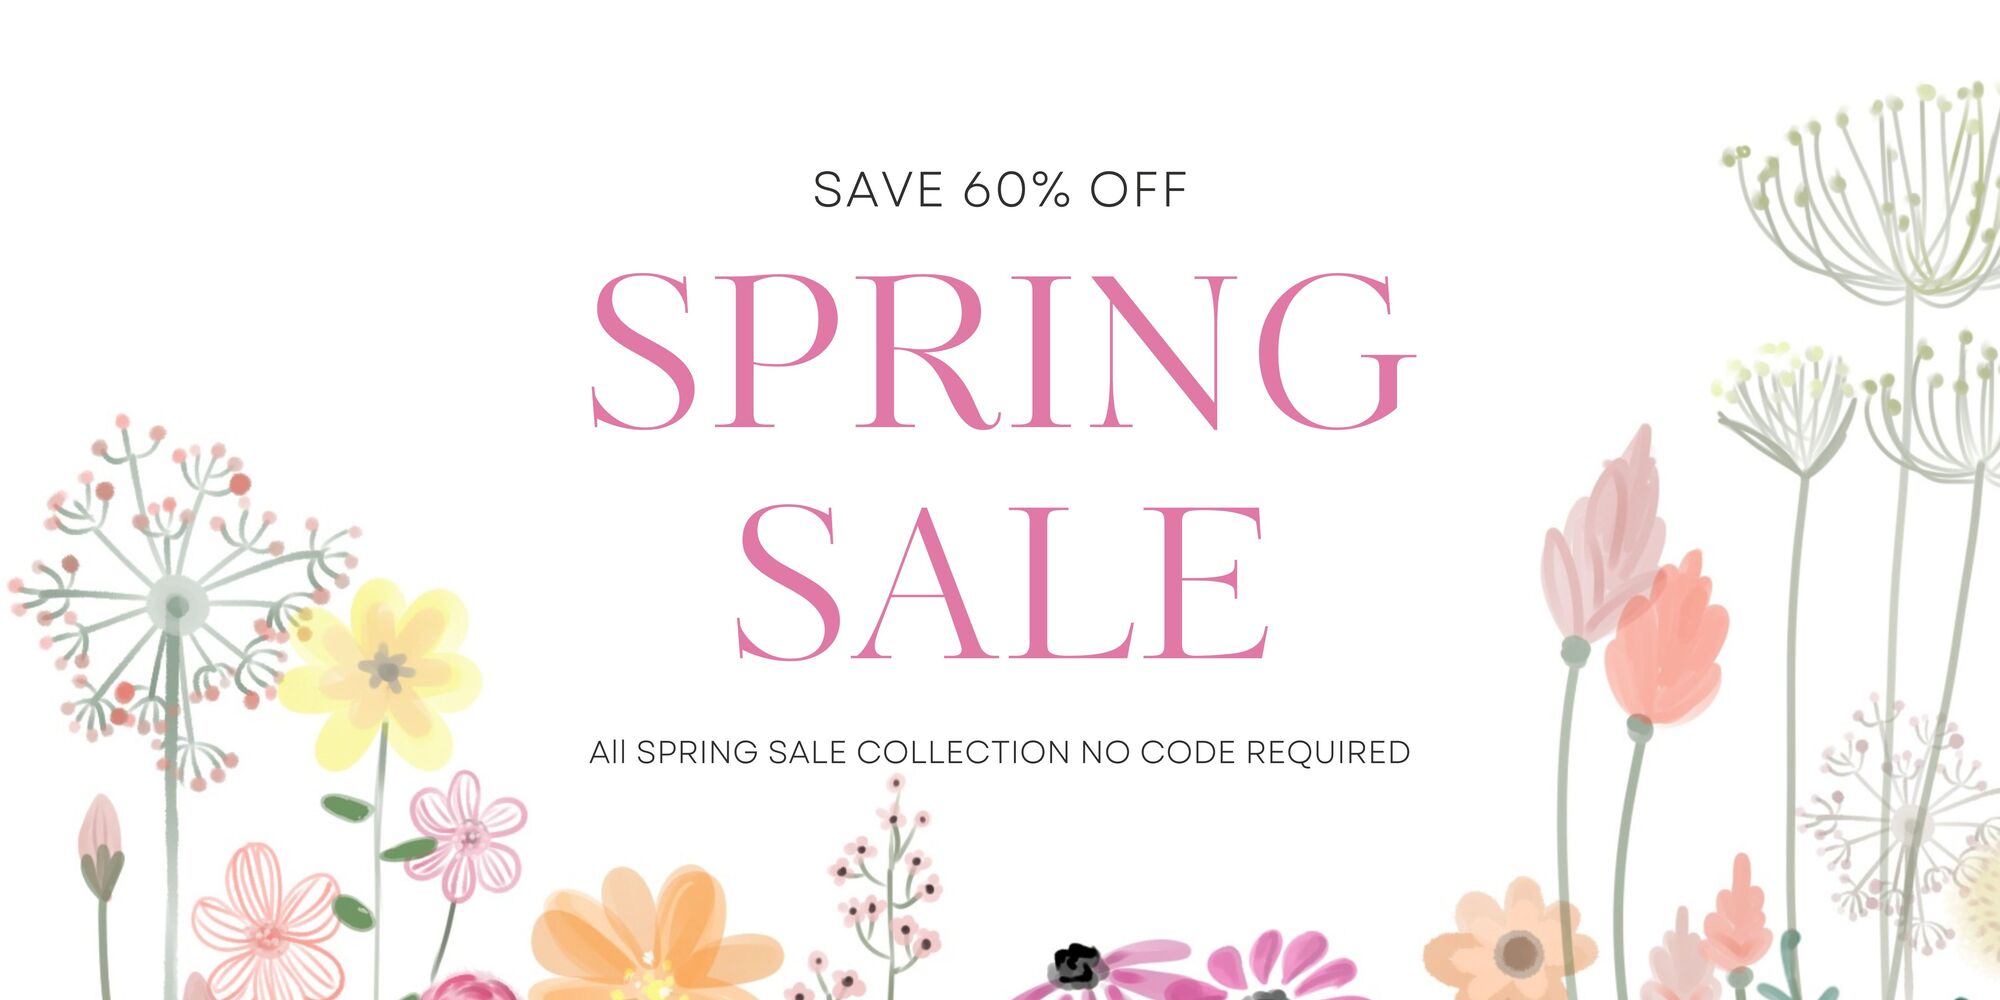 SAVE 60% OFF SPRING SALE All SPRING SALE COLLECTION NO CODE REQUIRED . 